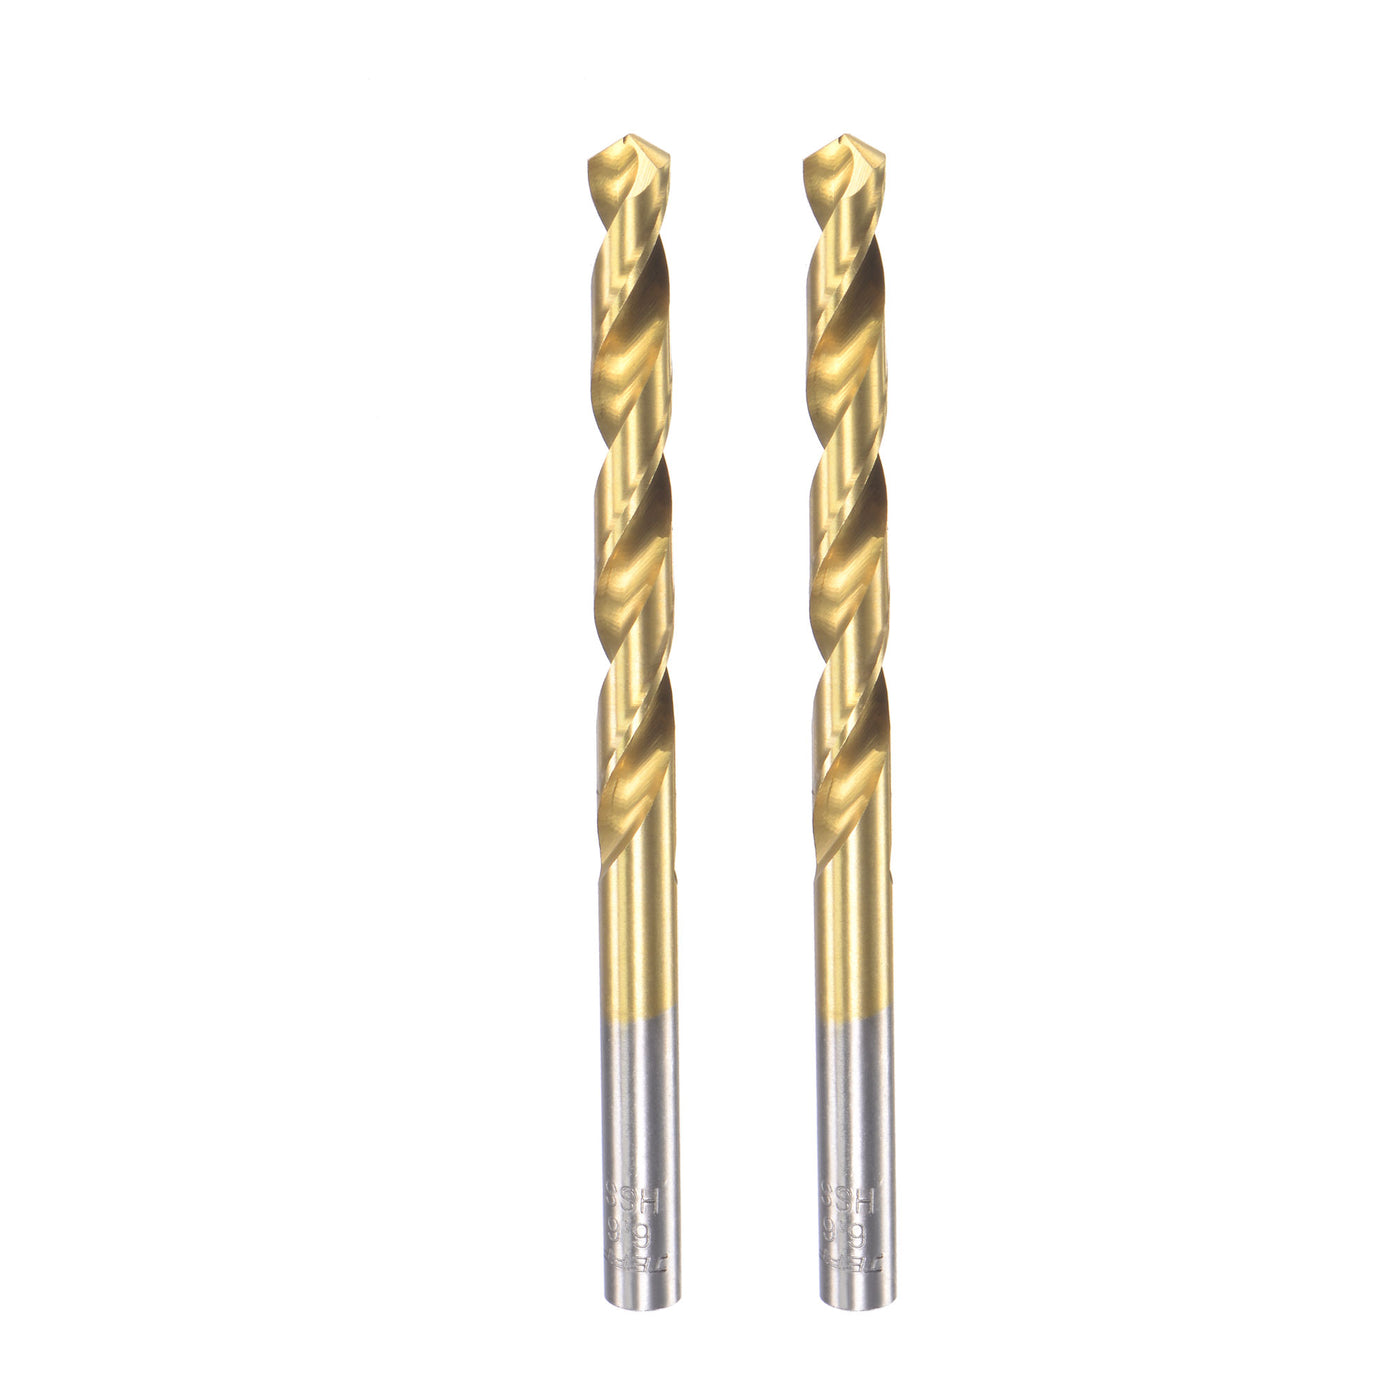 uxcell Uxcell High Speed Steel Twist Drill Bit 6.6mm Fully Ground Titanium Coated 2 Pcs